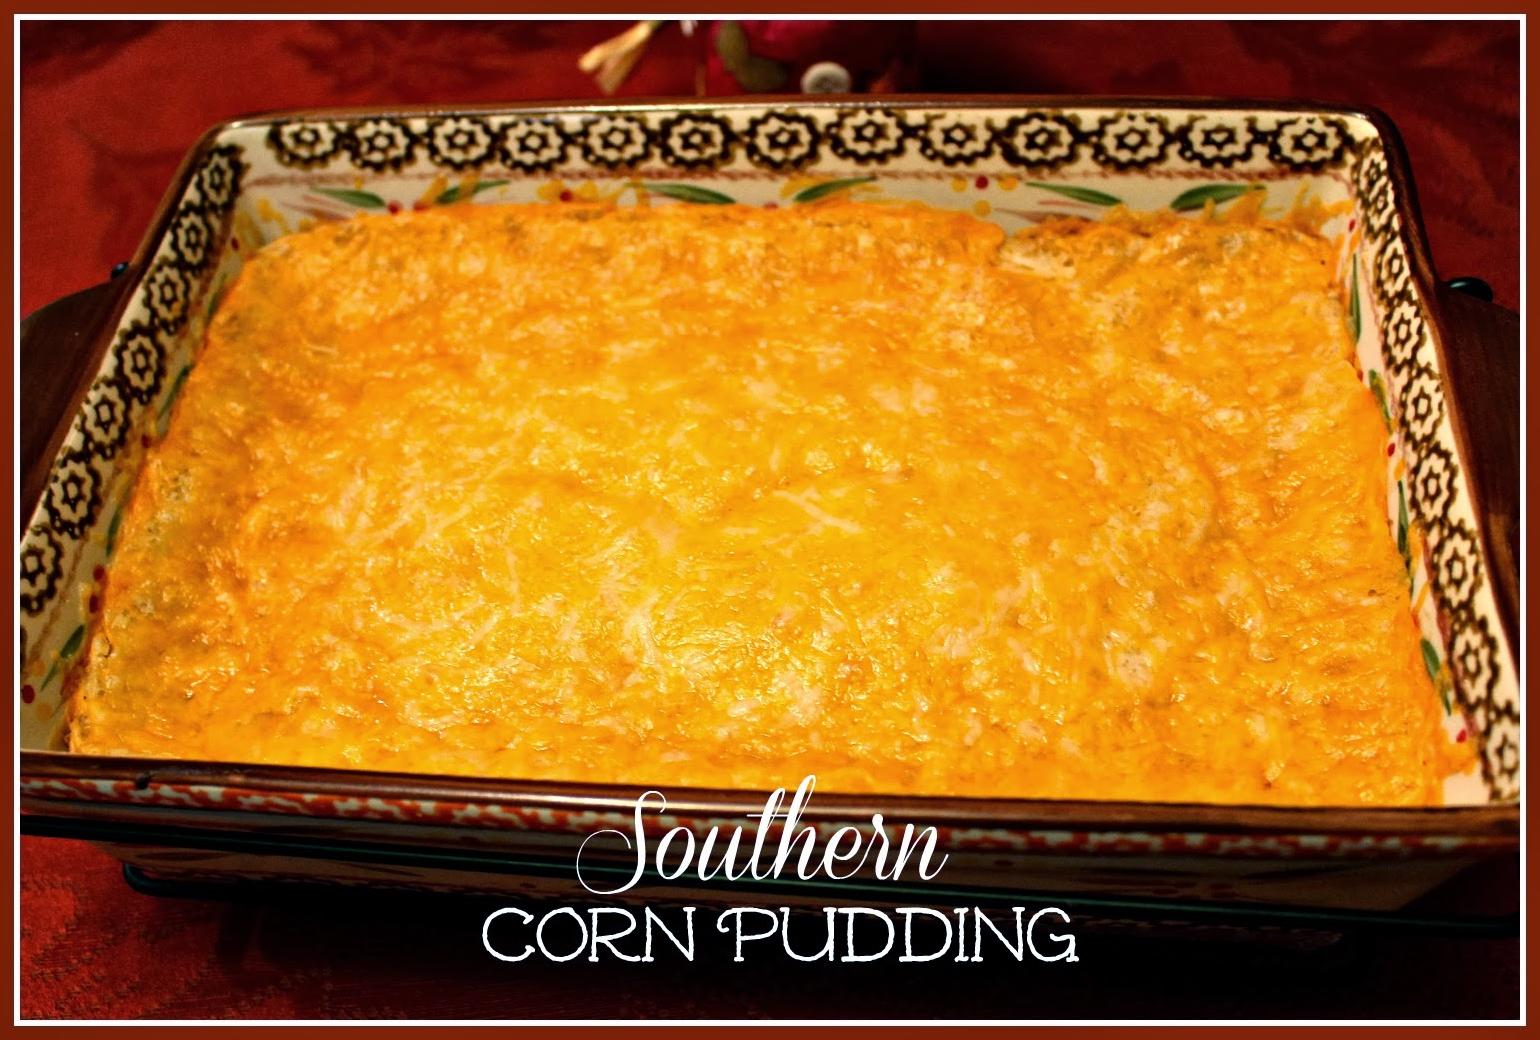  The golden crust on top of this corn pudding is a perfect contrast to the soft and flavorful inside.